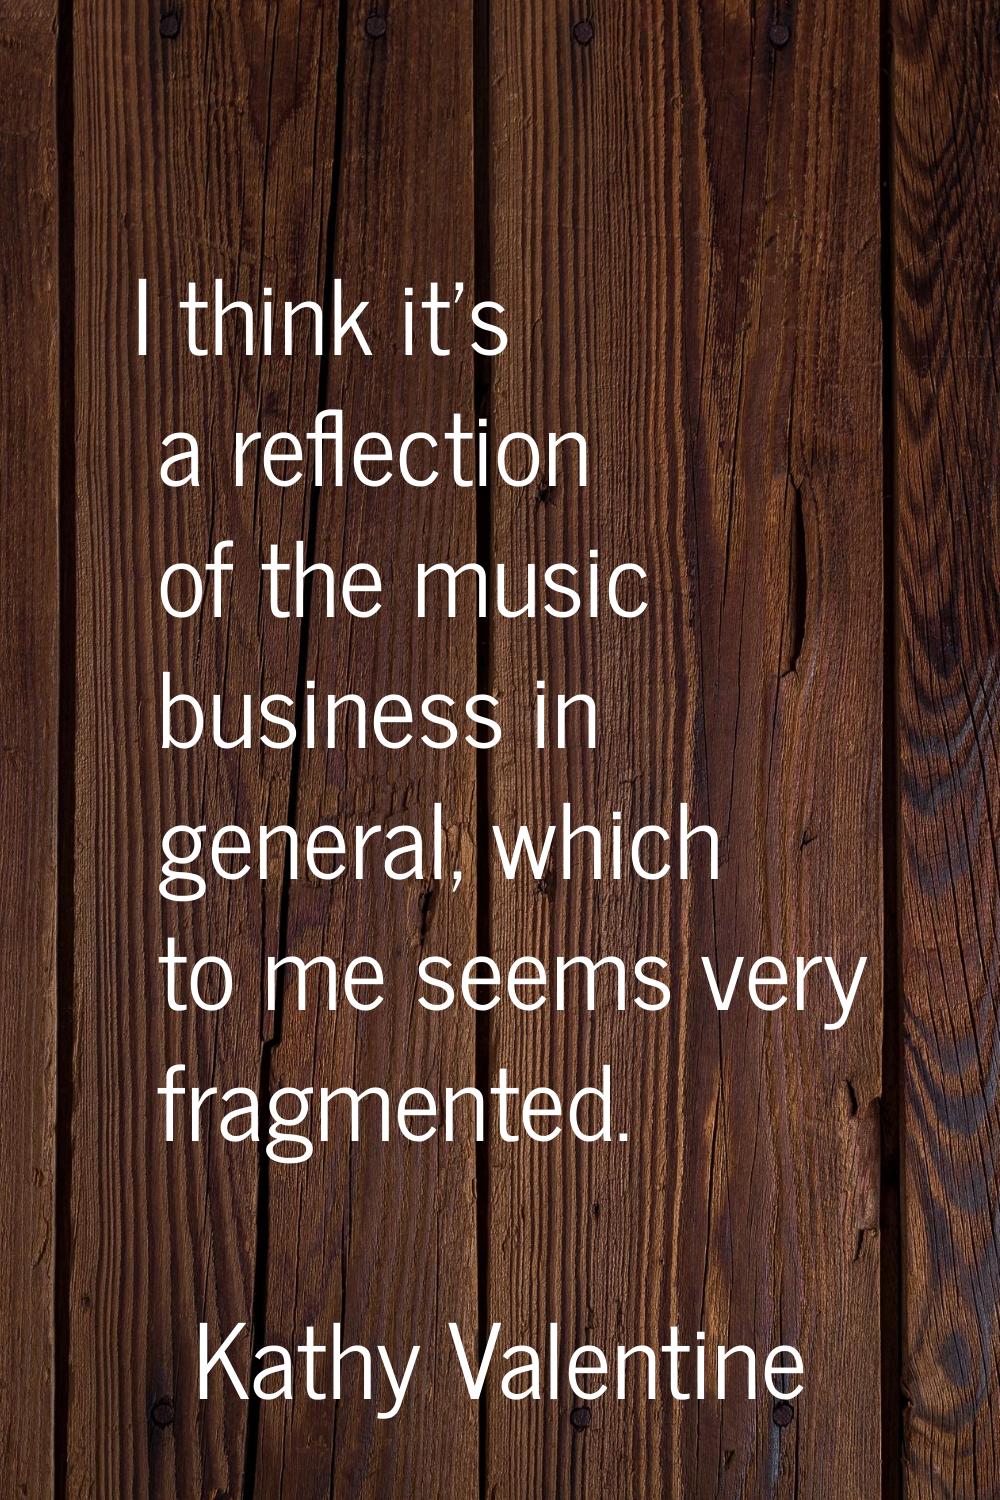 I think it's a reflection of the music business in general, which to me seems very fragmented.